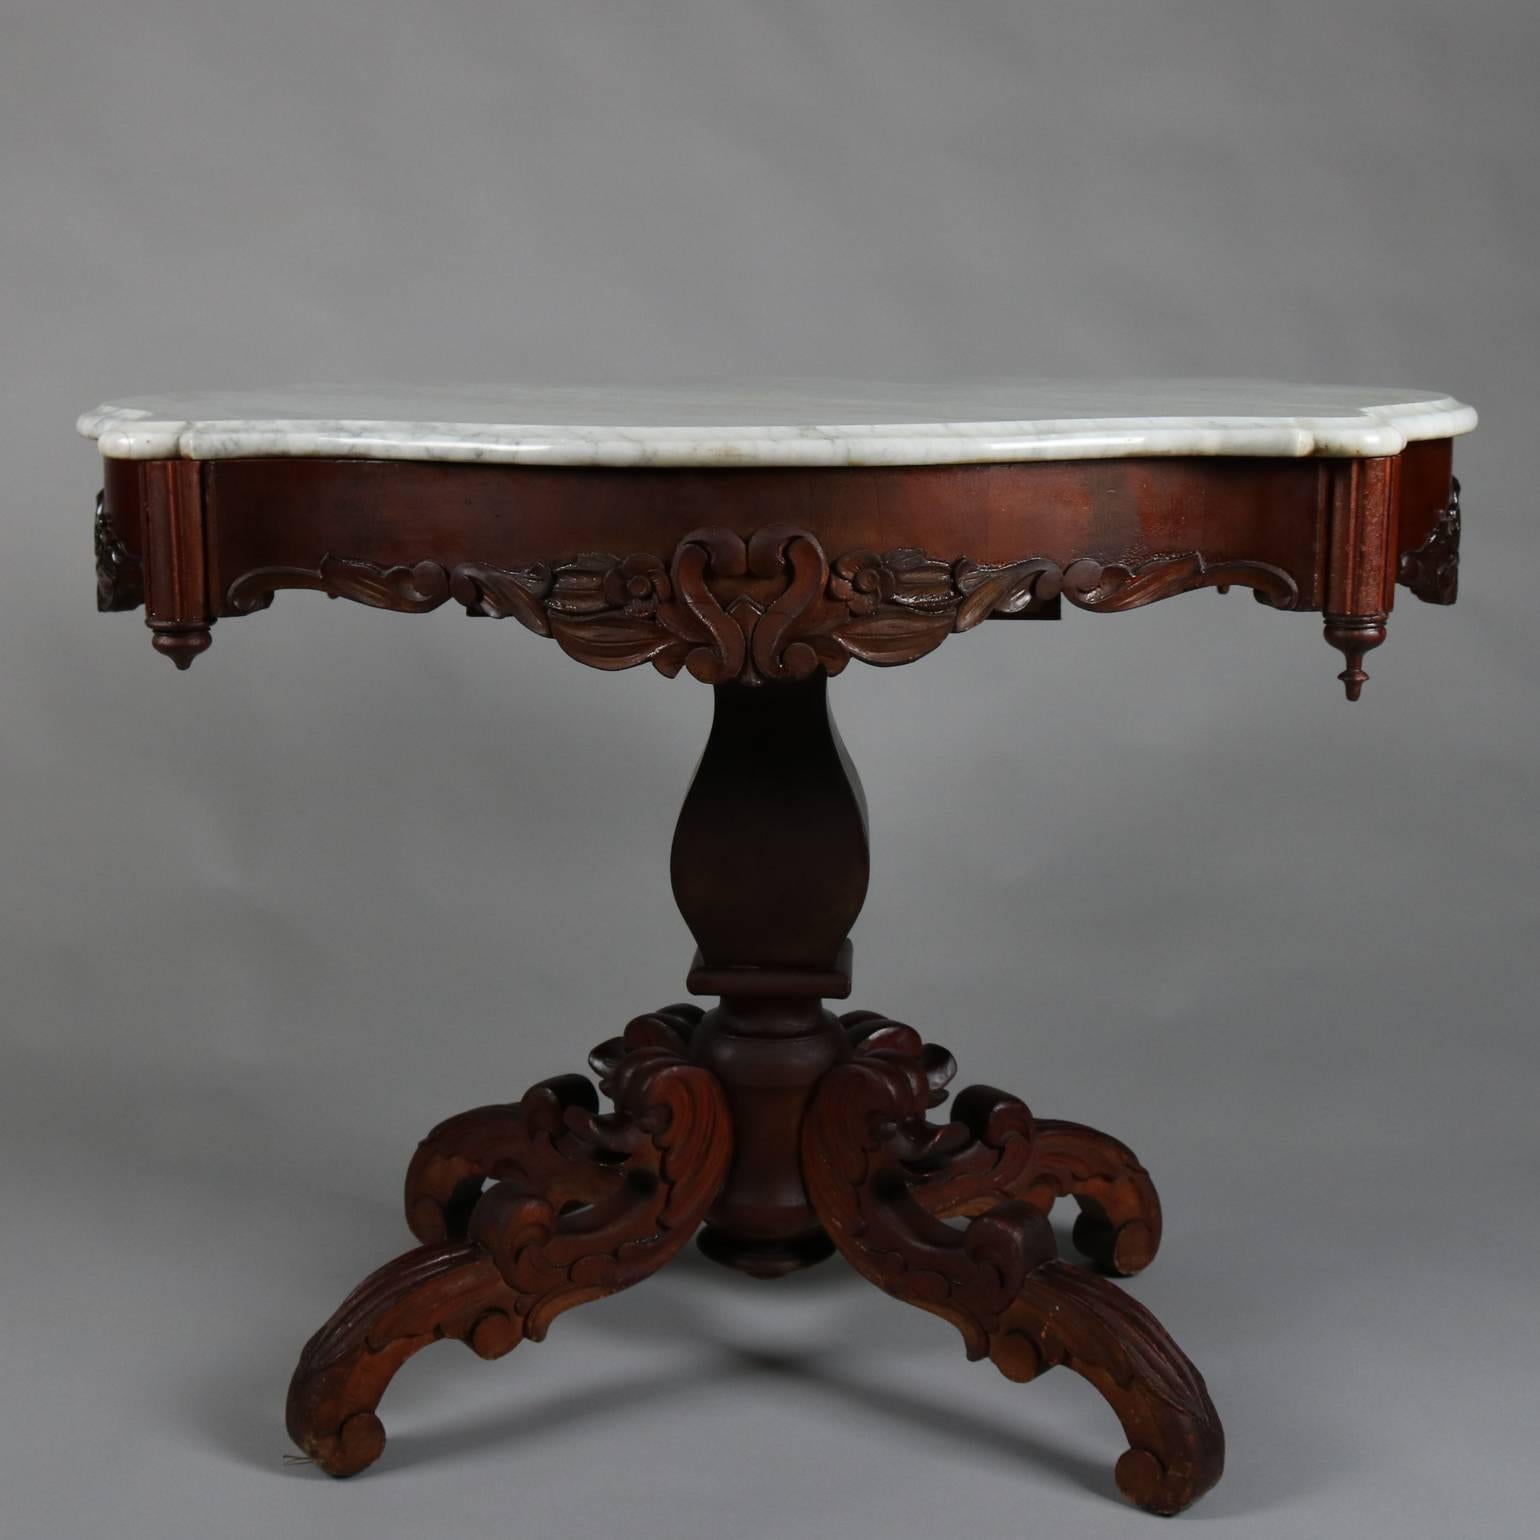 Antique mahogany side table features foliate carved apron with heart form opposing S-scroll decoration and corner drop finials supported on acanthus and dolphin legs and beneath marble turtle top, circa 1880

Measures - 28